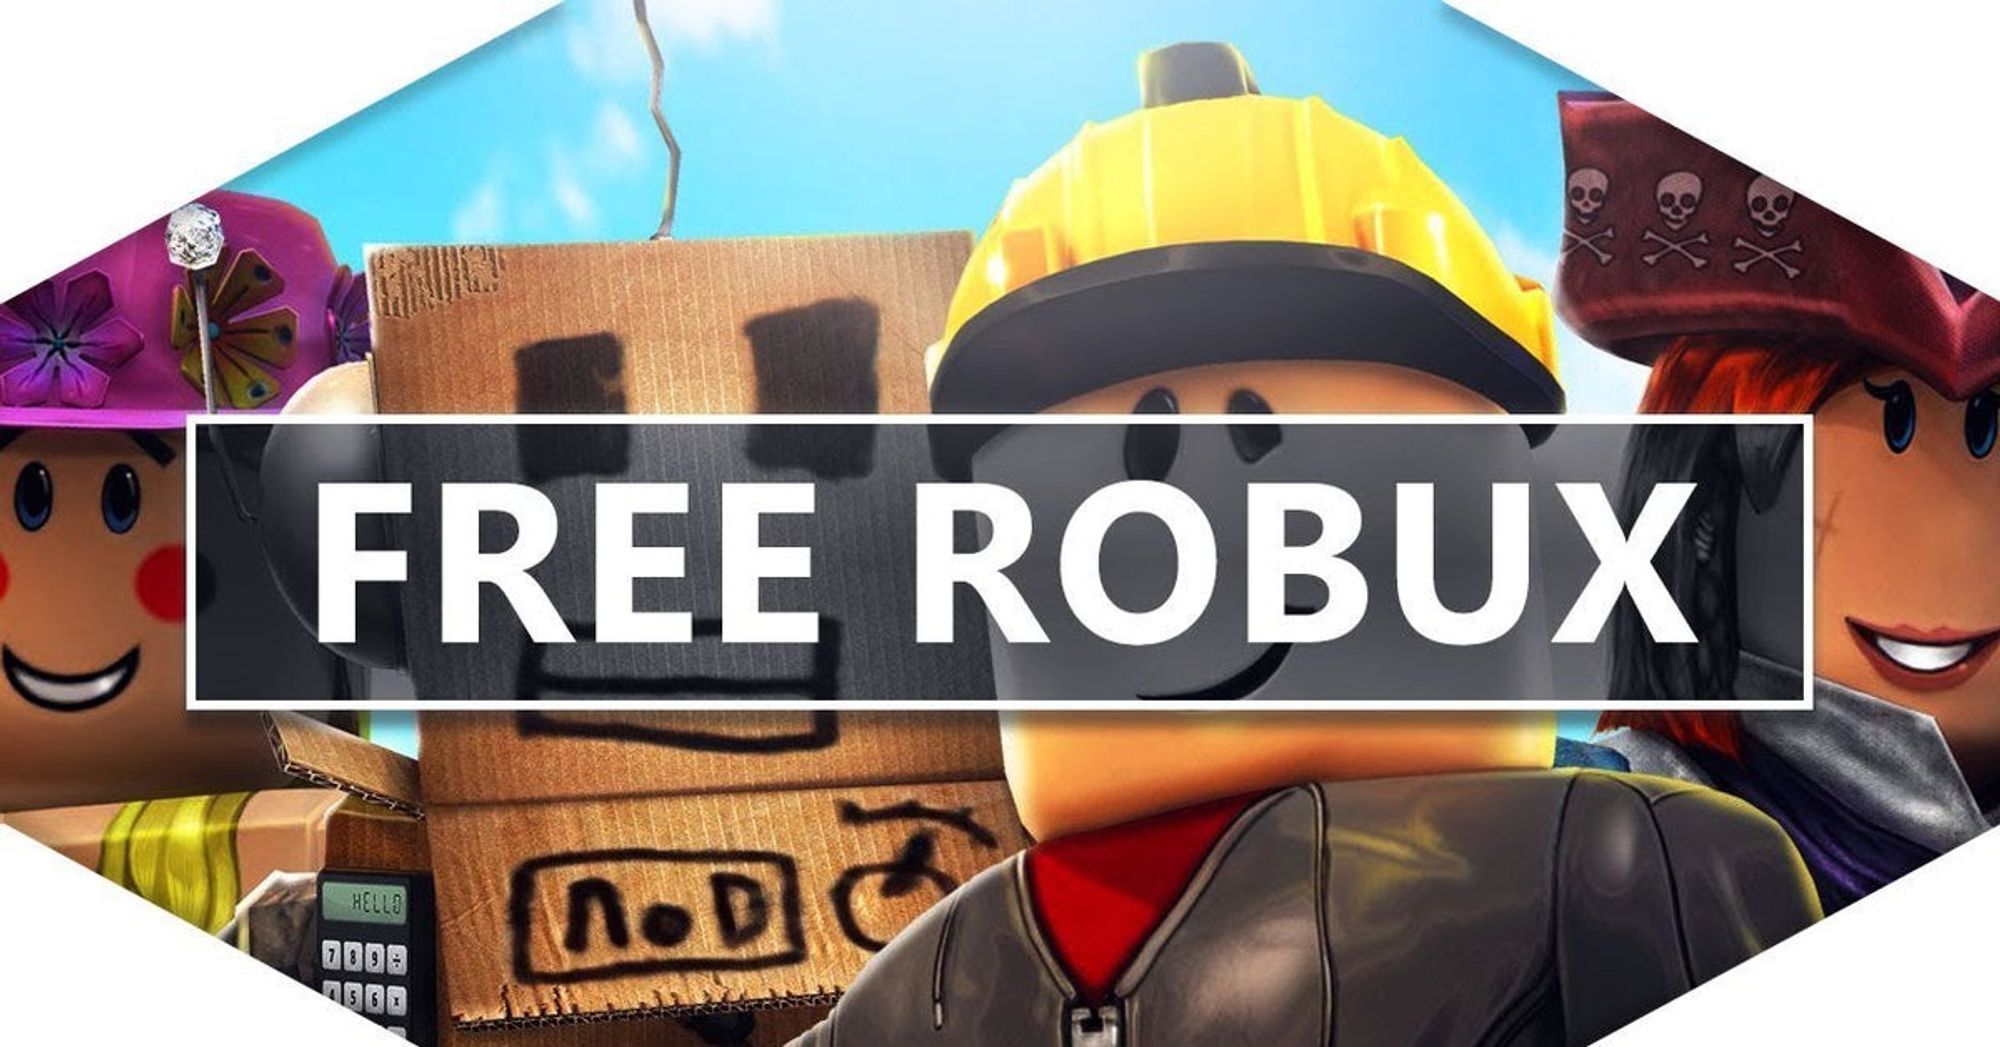 Rbxboost Get Free Robux Online - how to get free robux code working codes rbxboost youtube